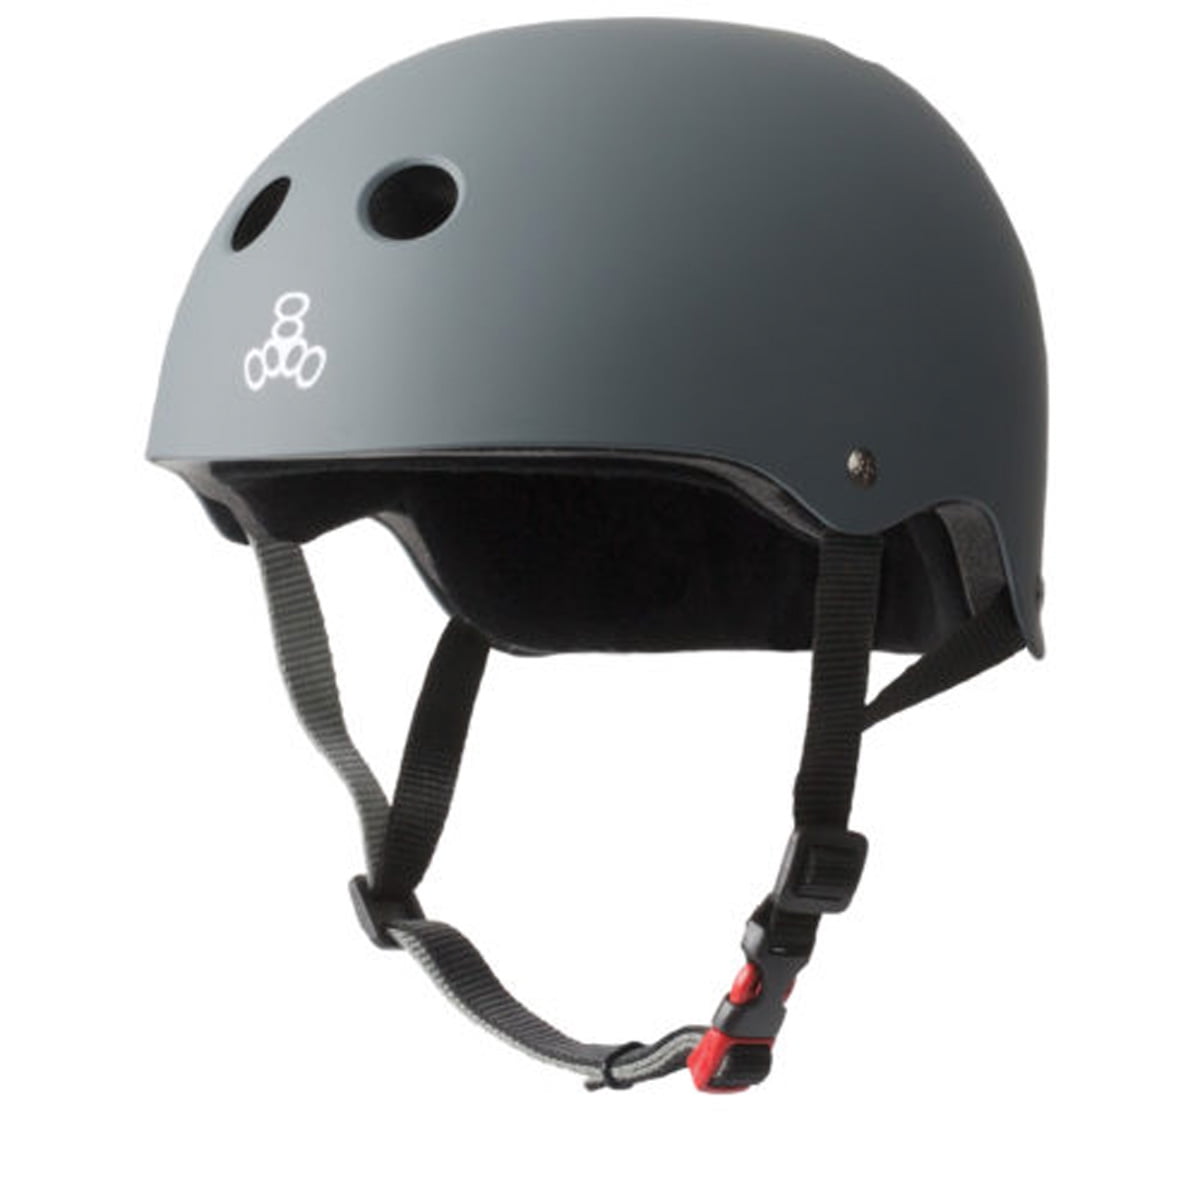 Skateboarding and BMX Triple Eight The Certified Sweatsaver Helmet with Visor for Roller Derby